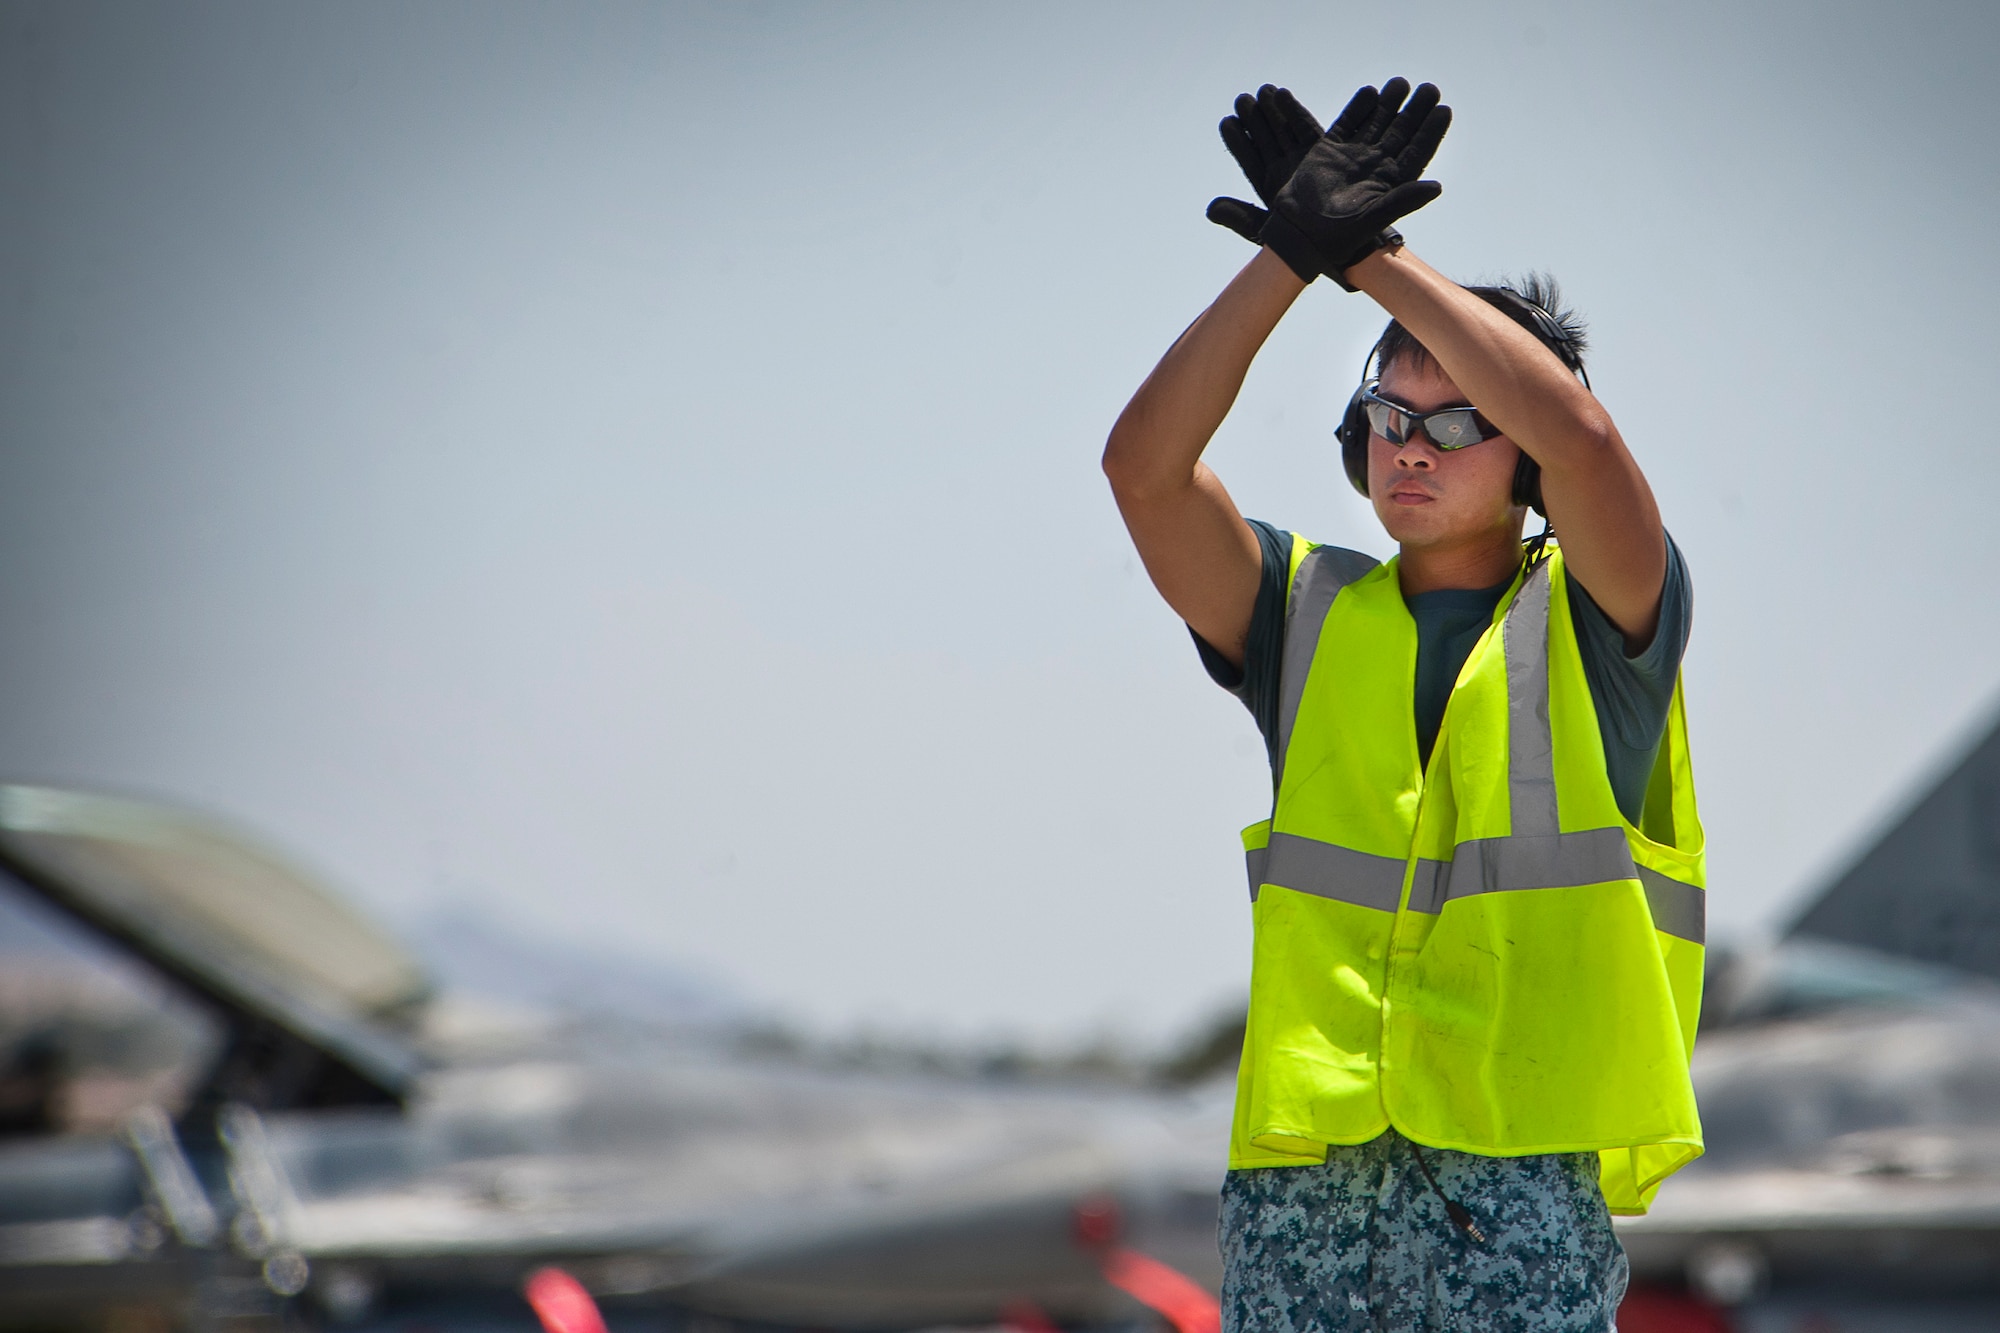 Republic of Singapore air force crew chief assigned to the 366th Fighter Wing, 428th Fighter Squadron, Mountain Home Air Force Base, Idaho, prepares to marshal an F-15SG aircraft during Red Flag 14-3, July 18, 2014 at Nellis AFB, Nev.  Red Flag provides maintenance support members from various airframes, military services and allied countries an opportunity to integrate and practice combat operations. (U.S. Air Force photo by Lawrence Crespo)